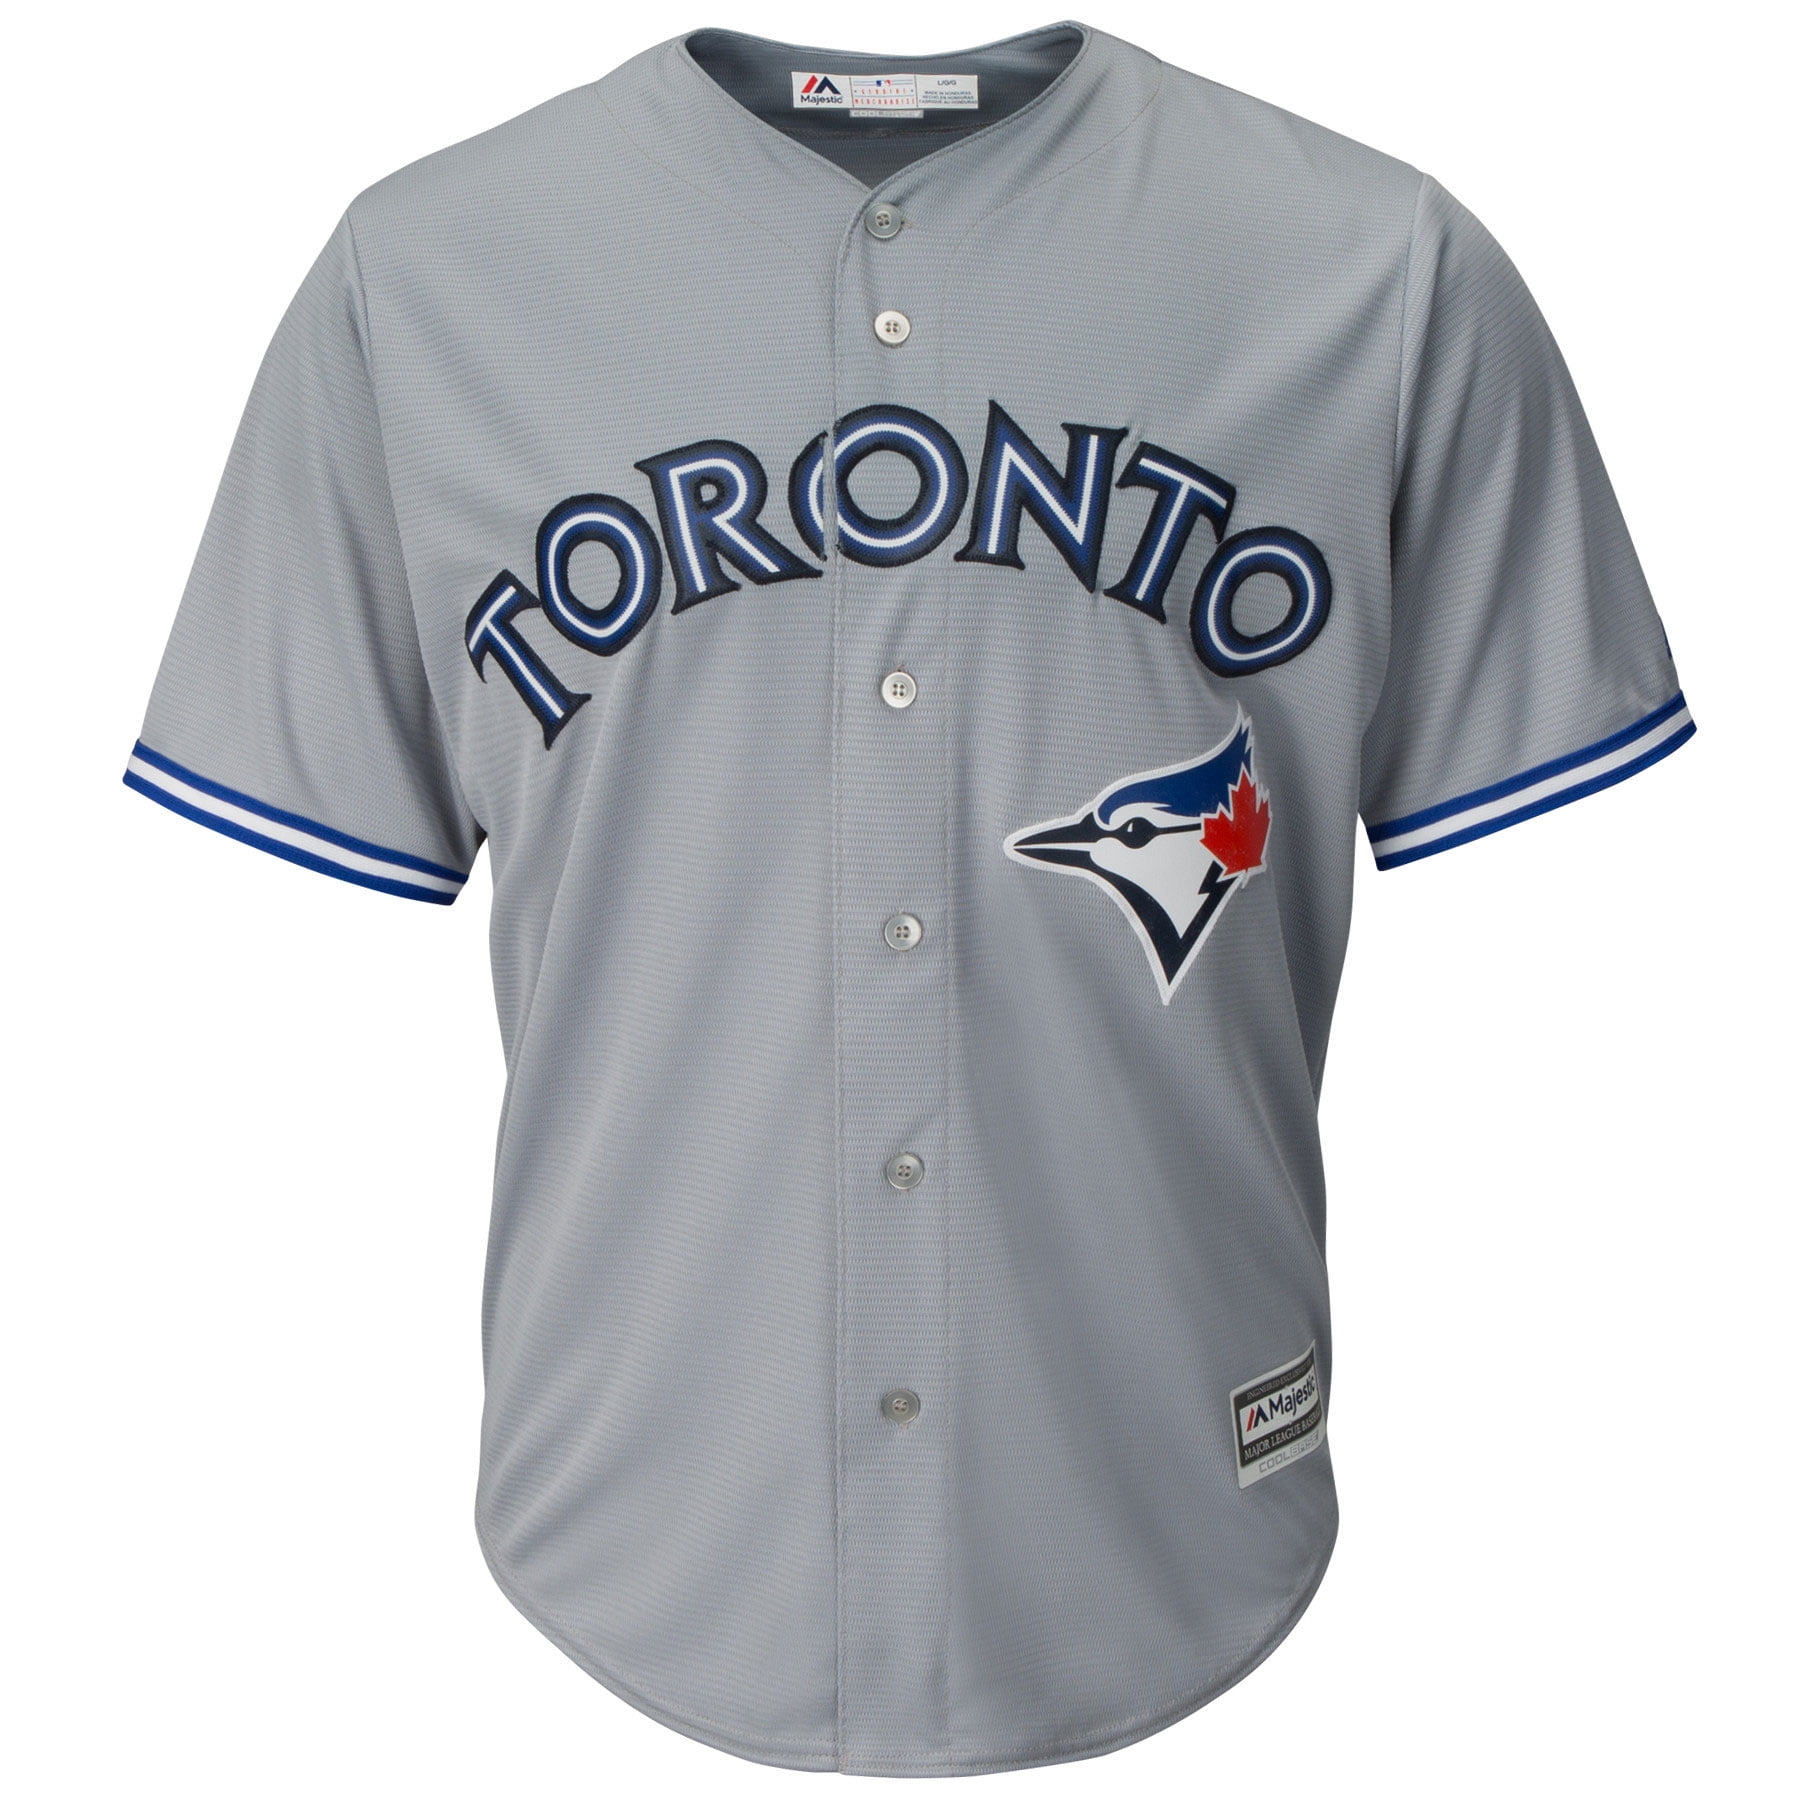 where can i buy a blue jays jersey